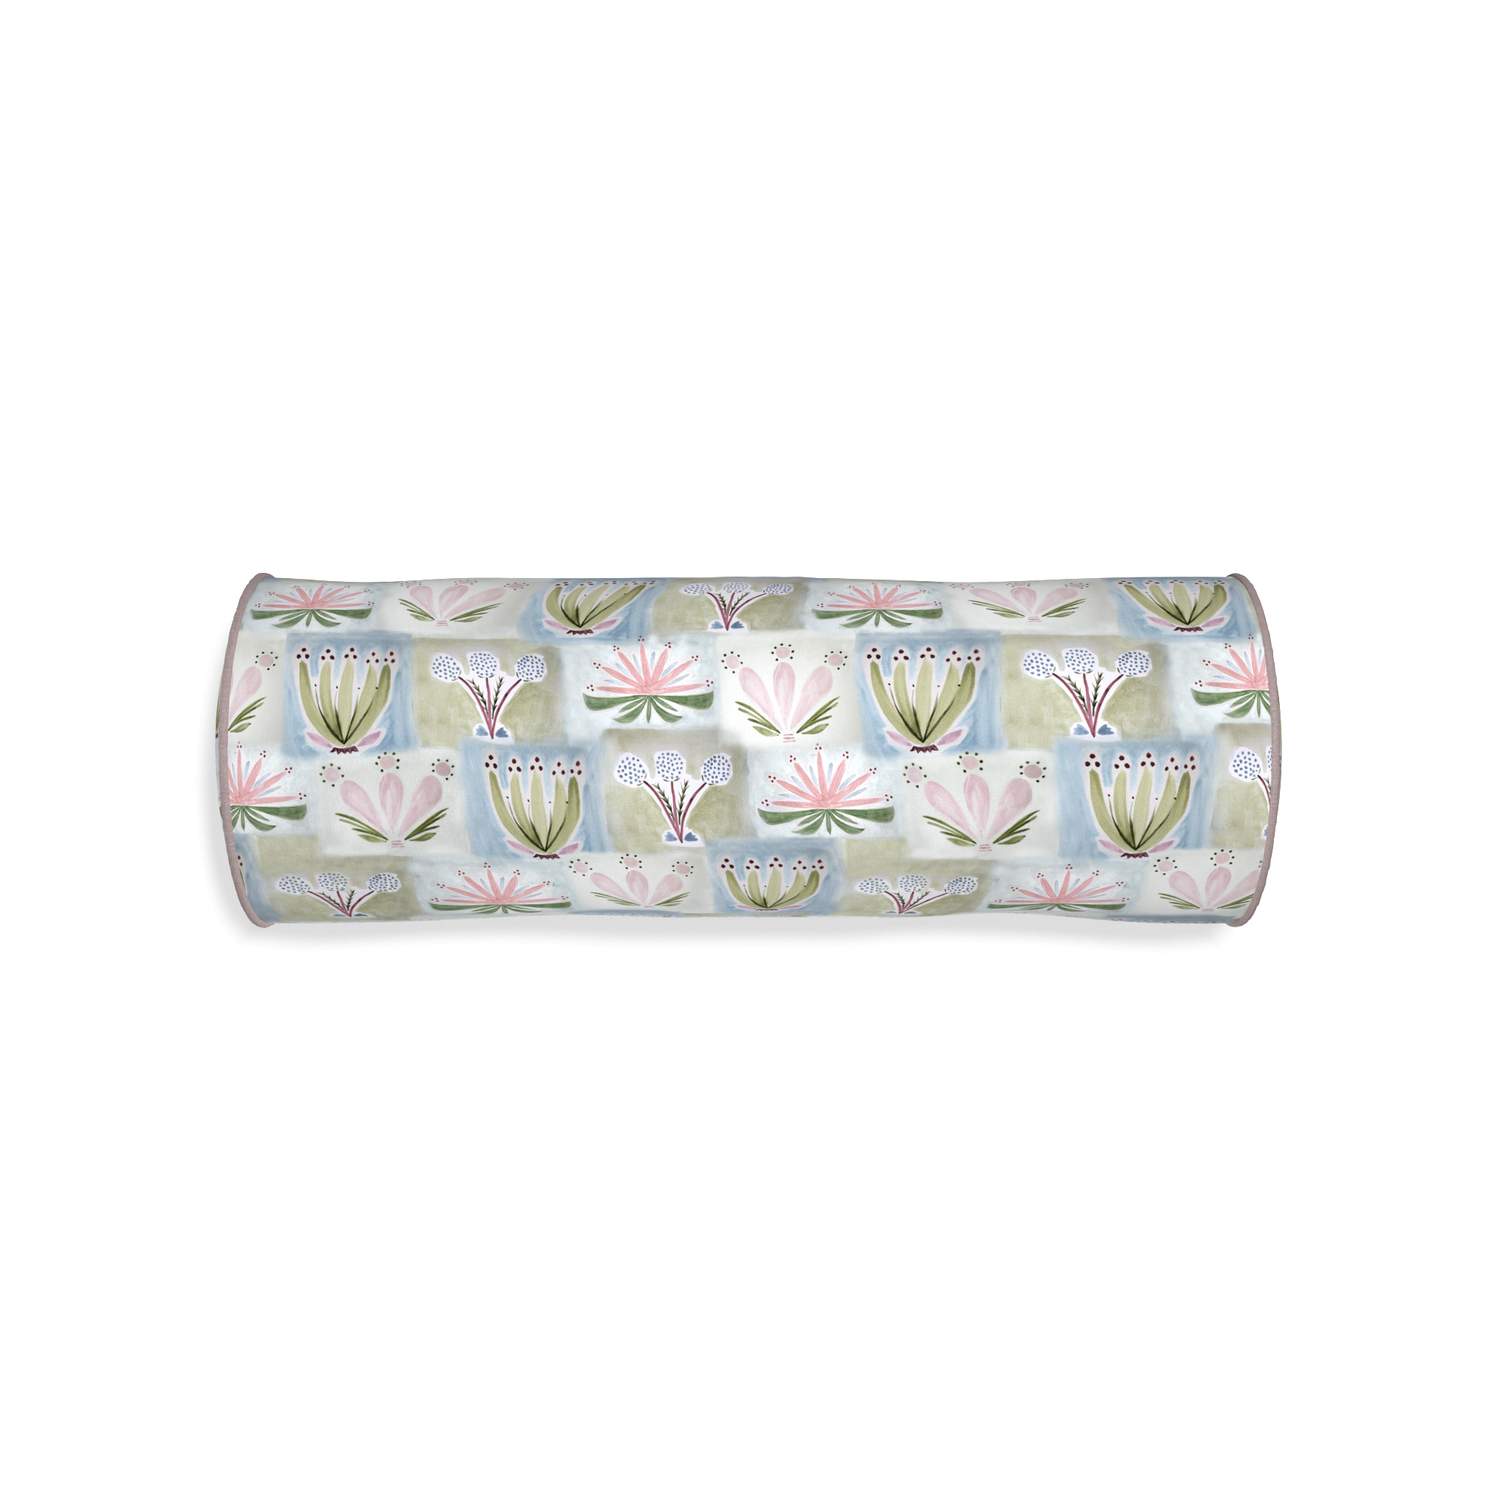 Bolster harper custom hand-painted floralpillow with orchid piping on white background